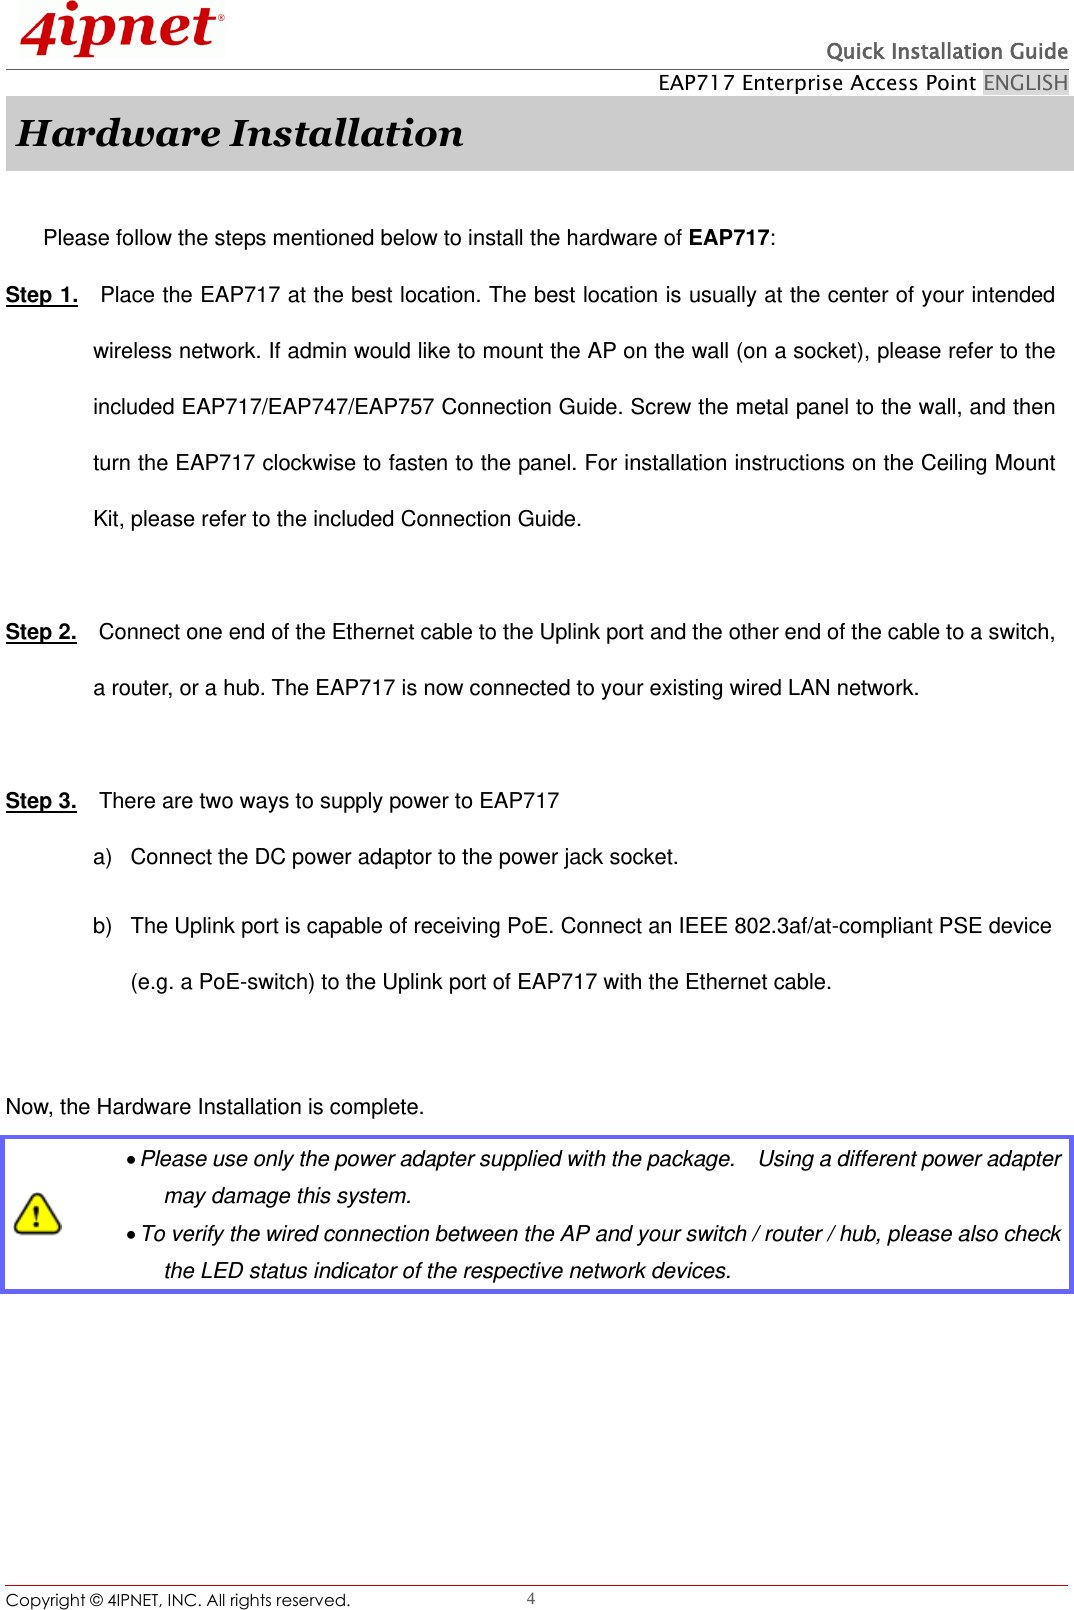  Quick Installation Guide EAP717 Enterprise Access Point ENGLISH Copyright ©  4IPNET, INC. All rights reserved.                                                              4 Hardware Installation  Please follow the steps mentioned below to install the hardware of EAP717: Step 1.  Place the EAP717 at the best location. The best location is usually at the center of your intended wireless network. If admin would like to mount the AP on the wall (on a socket), please refer to the included EAP717/EAP747/EAP757 Connection Guide. Screw the metal panel to the wall, and then turn the EAP717 clockwise to fasten to the panel. For installation instructions on the Ceiling Mount Kit, please refer to the included Connection Guide.  Step 2.  Connect one end of the Ethernet cable to the Uplink port and the other end of the cable to a switch, a router, or a hub. The EAP717 is now connected to your existing wired LAN network.    Step 3.    There are two ways to supply power to EAP717 a)  Connect the DC power adaptor to the power jack socket. b)  The Uplink port is capable of receiving PoE. Connect an IEEE 802.3af/at-compliant PSE device (e.g. a PoE-switch) to the Uplink port of EAP717 with the Ethernet cable.  Now, the Hardware Installation is complete.   Please use only the power adapter supplied with the package.    Using a different power adapter may damage this system.  To verify the wired connection between the AP and your switch / router / hub, please also check the LED status indicator of the respective network devices. 